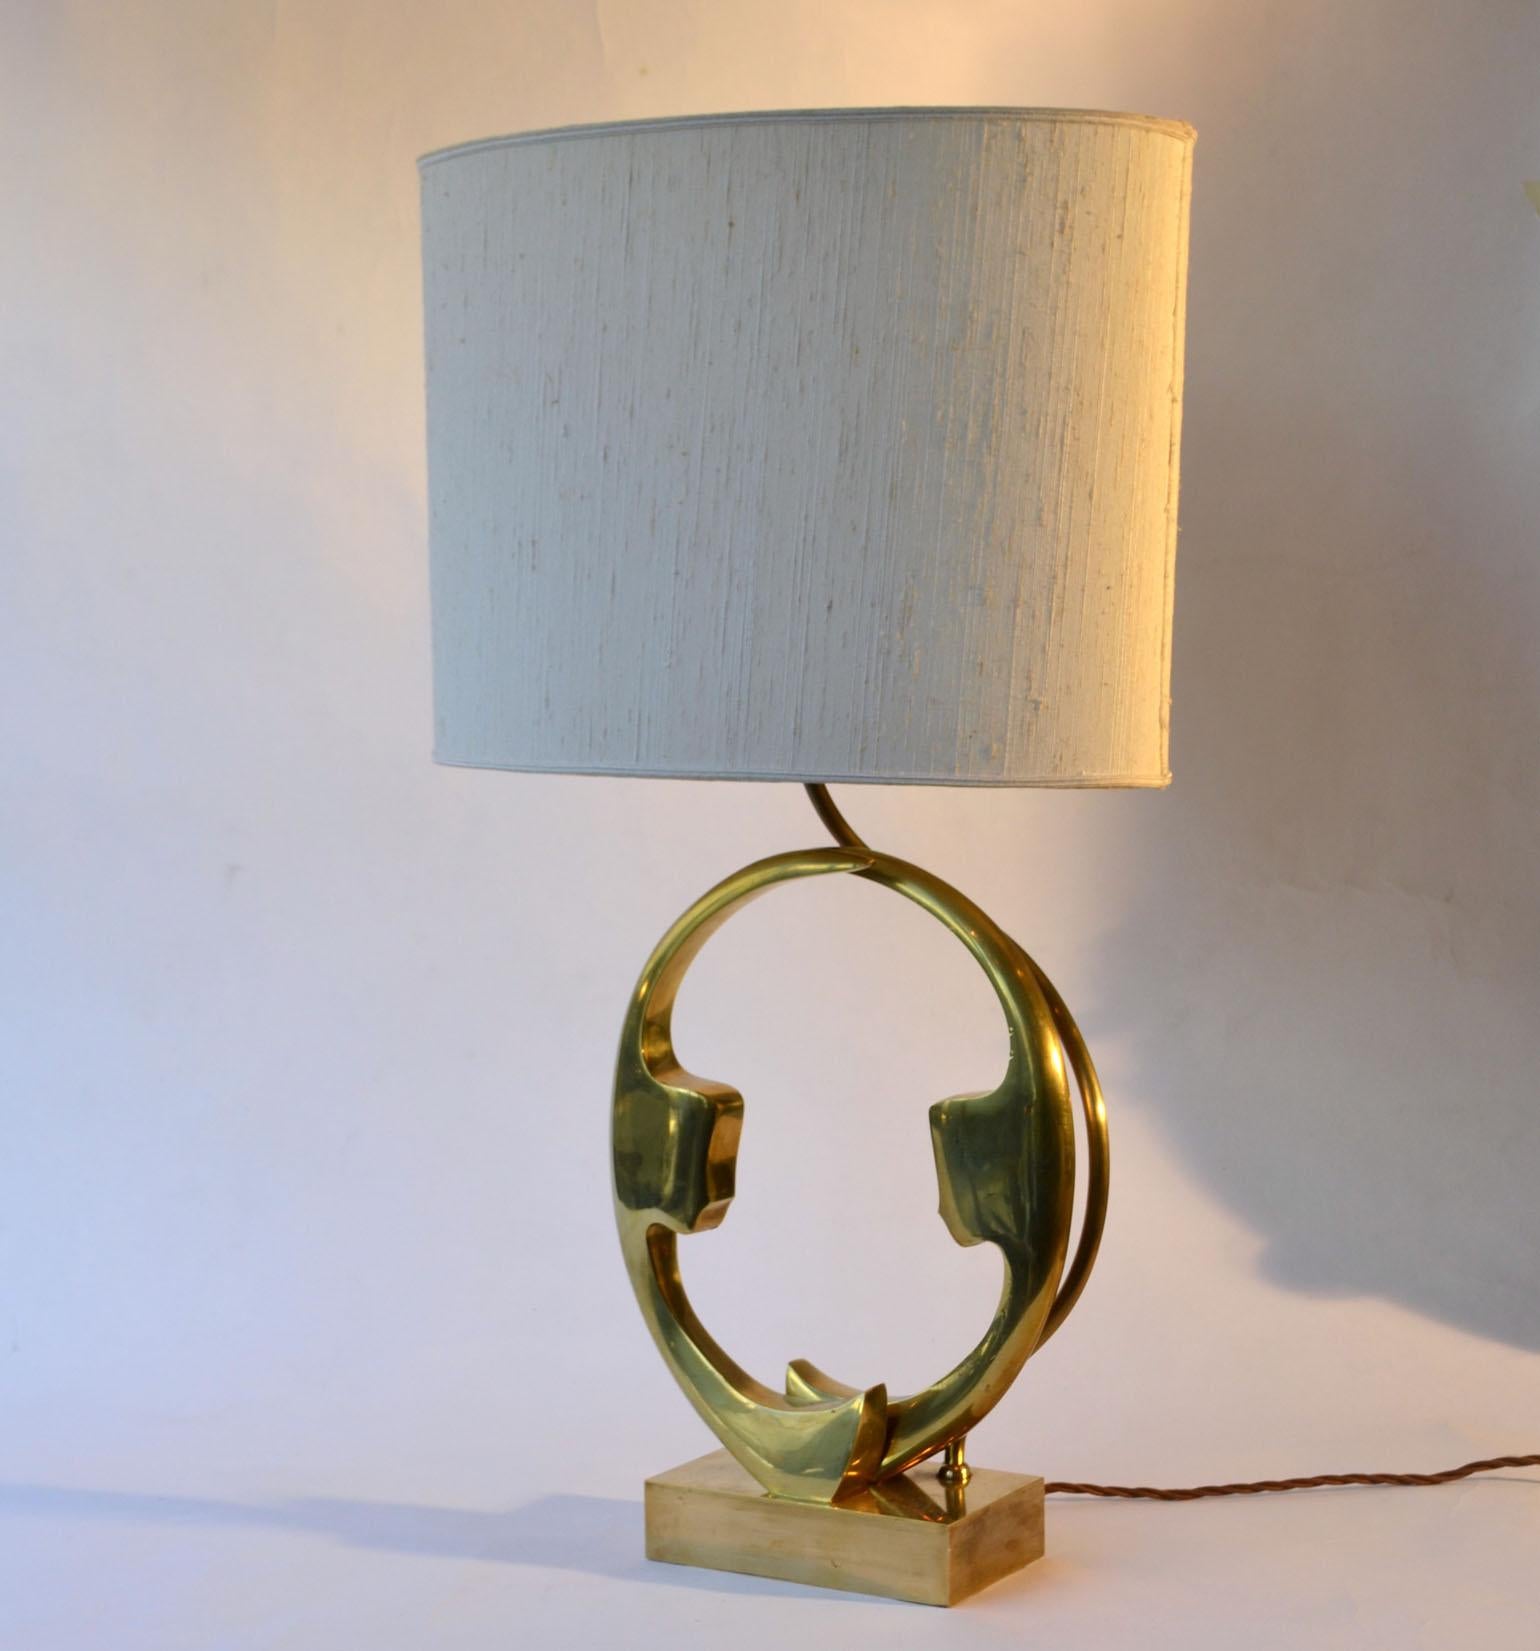 Single brass and bronze cast table lamp signed Willy Daro, Belgium 1970s picturing two female silhouettes faces facing each other on an oval ring. with original oval lampshade.
Belgian artist Willy Daro founded his factory 